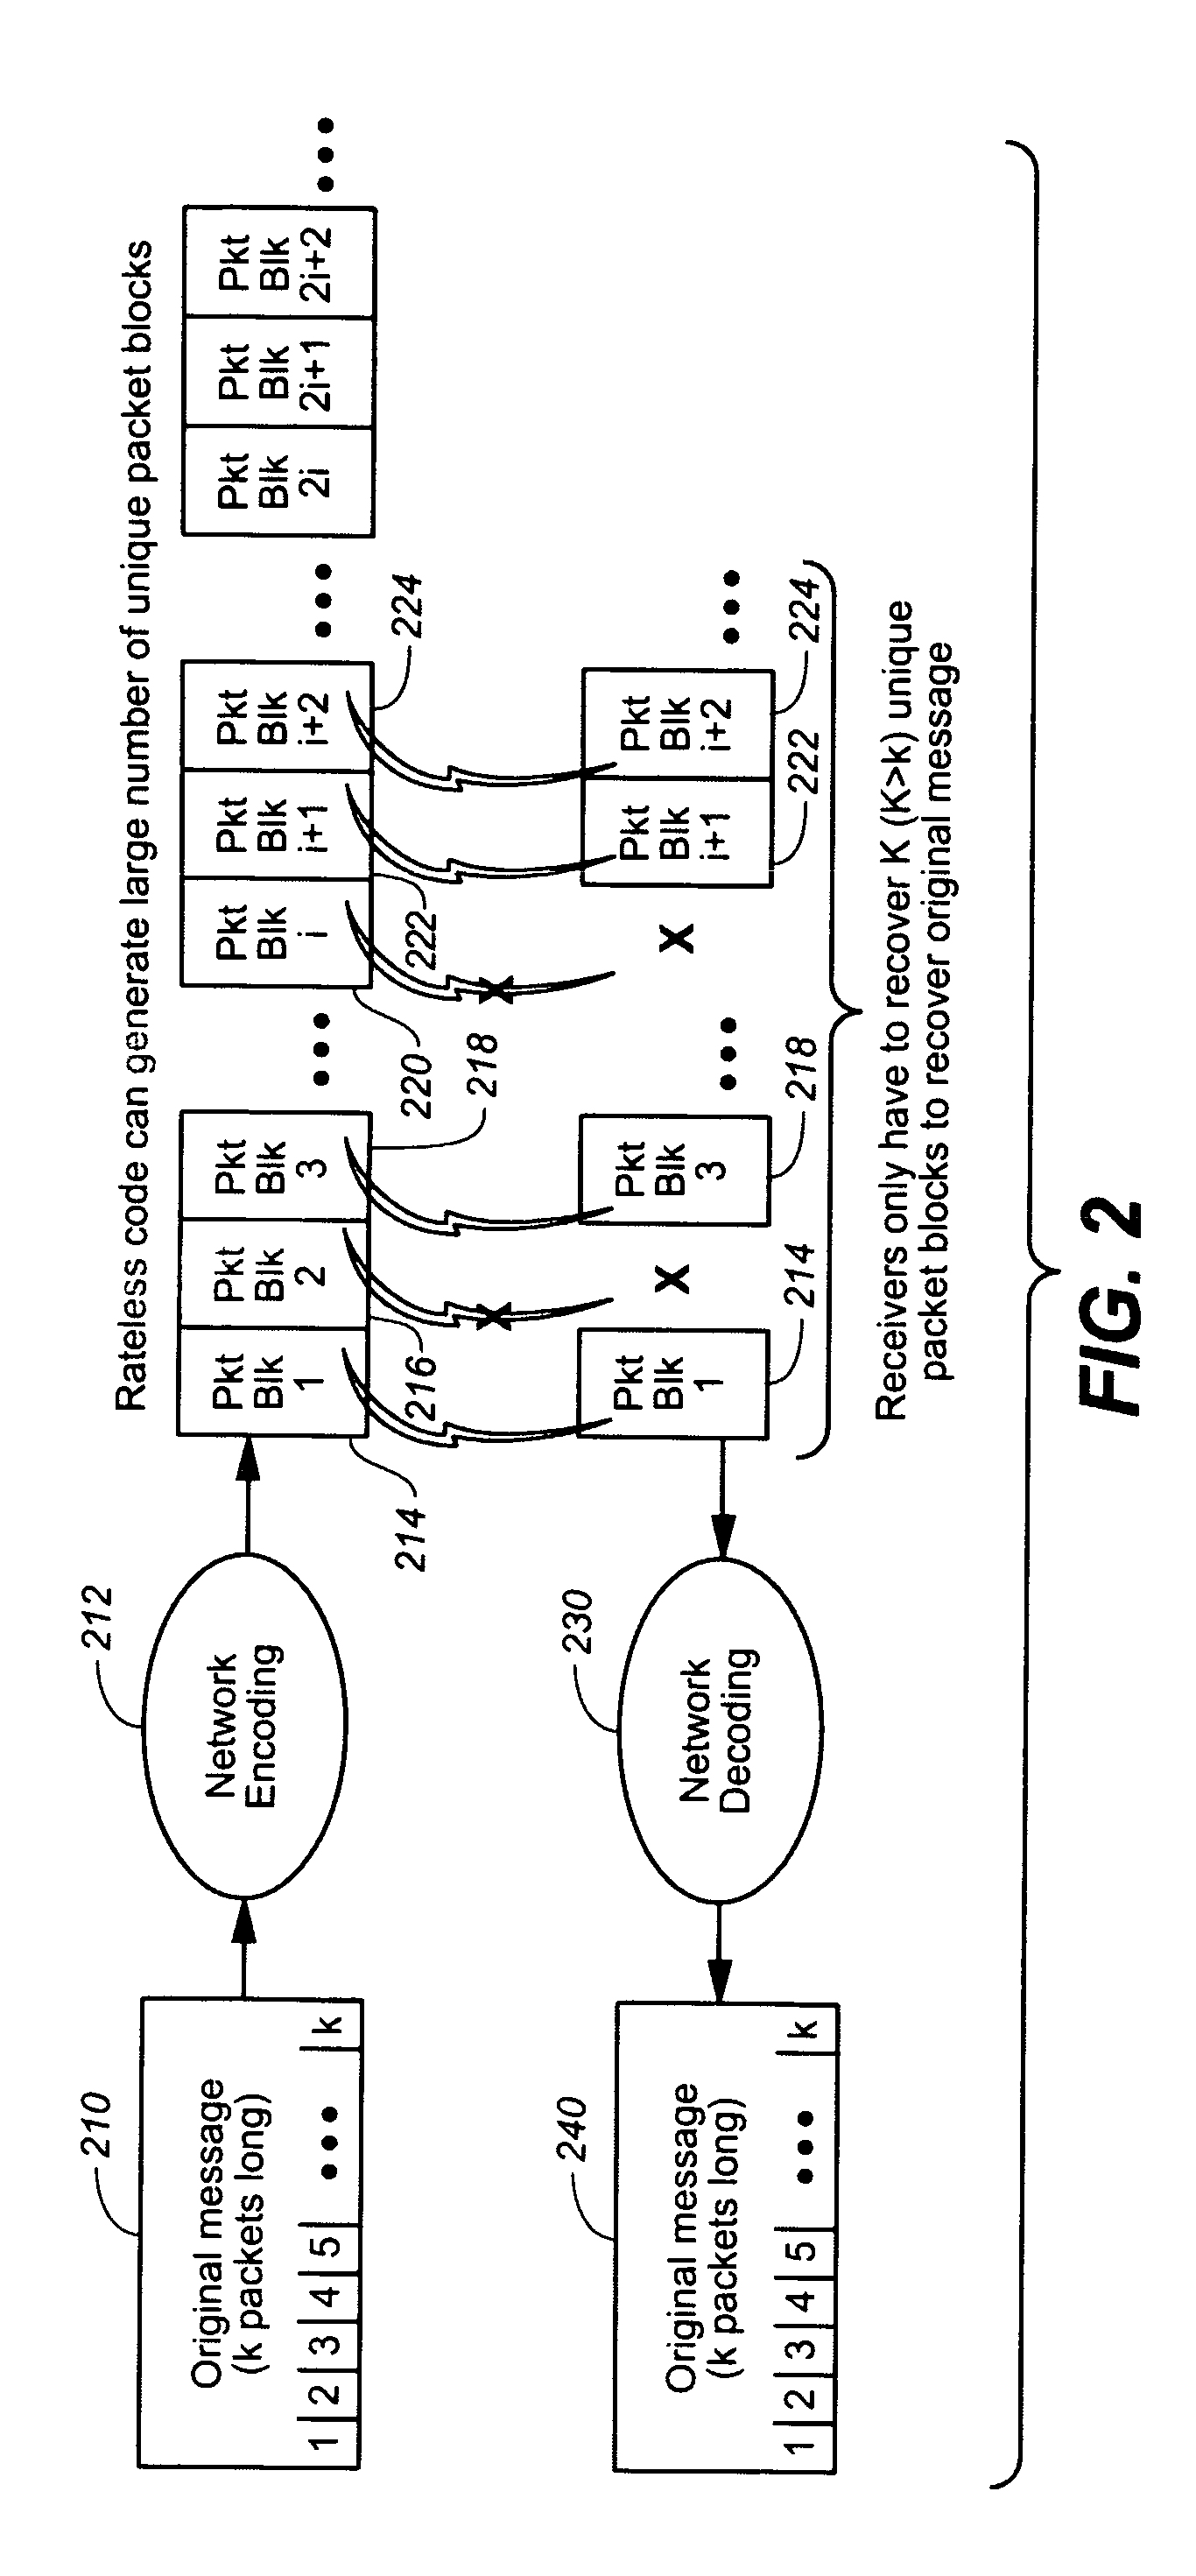 Method and apparatus for multihop network FEC encoding